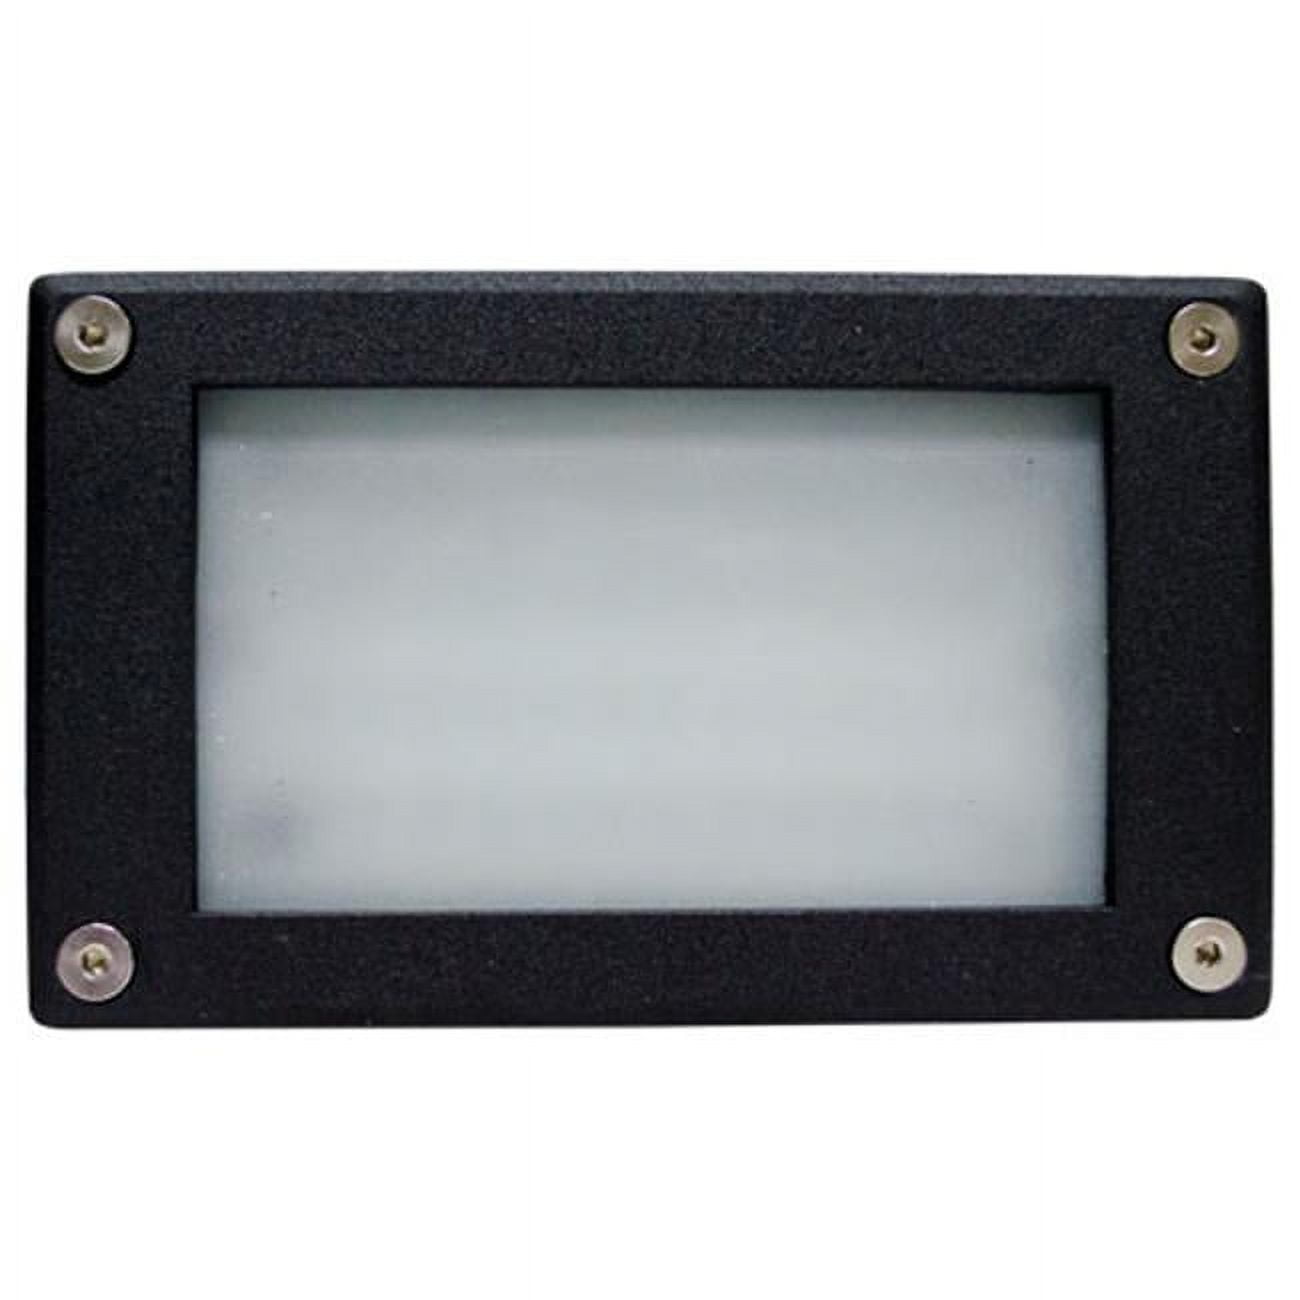 Picture of Dabmar Lighting LV650-B Cast Aluminum Recessed Open Face Brick, Step & Wall Light, Black - 3.88 x 6.44 x 2.63 in.